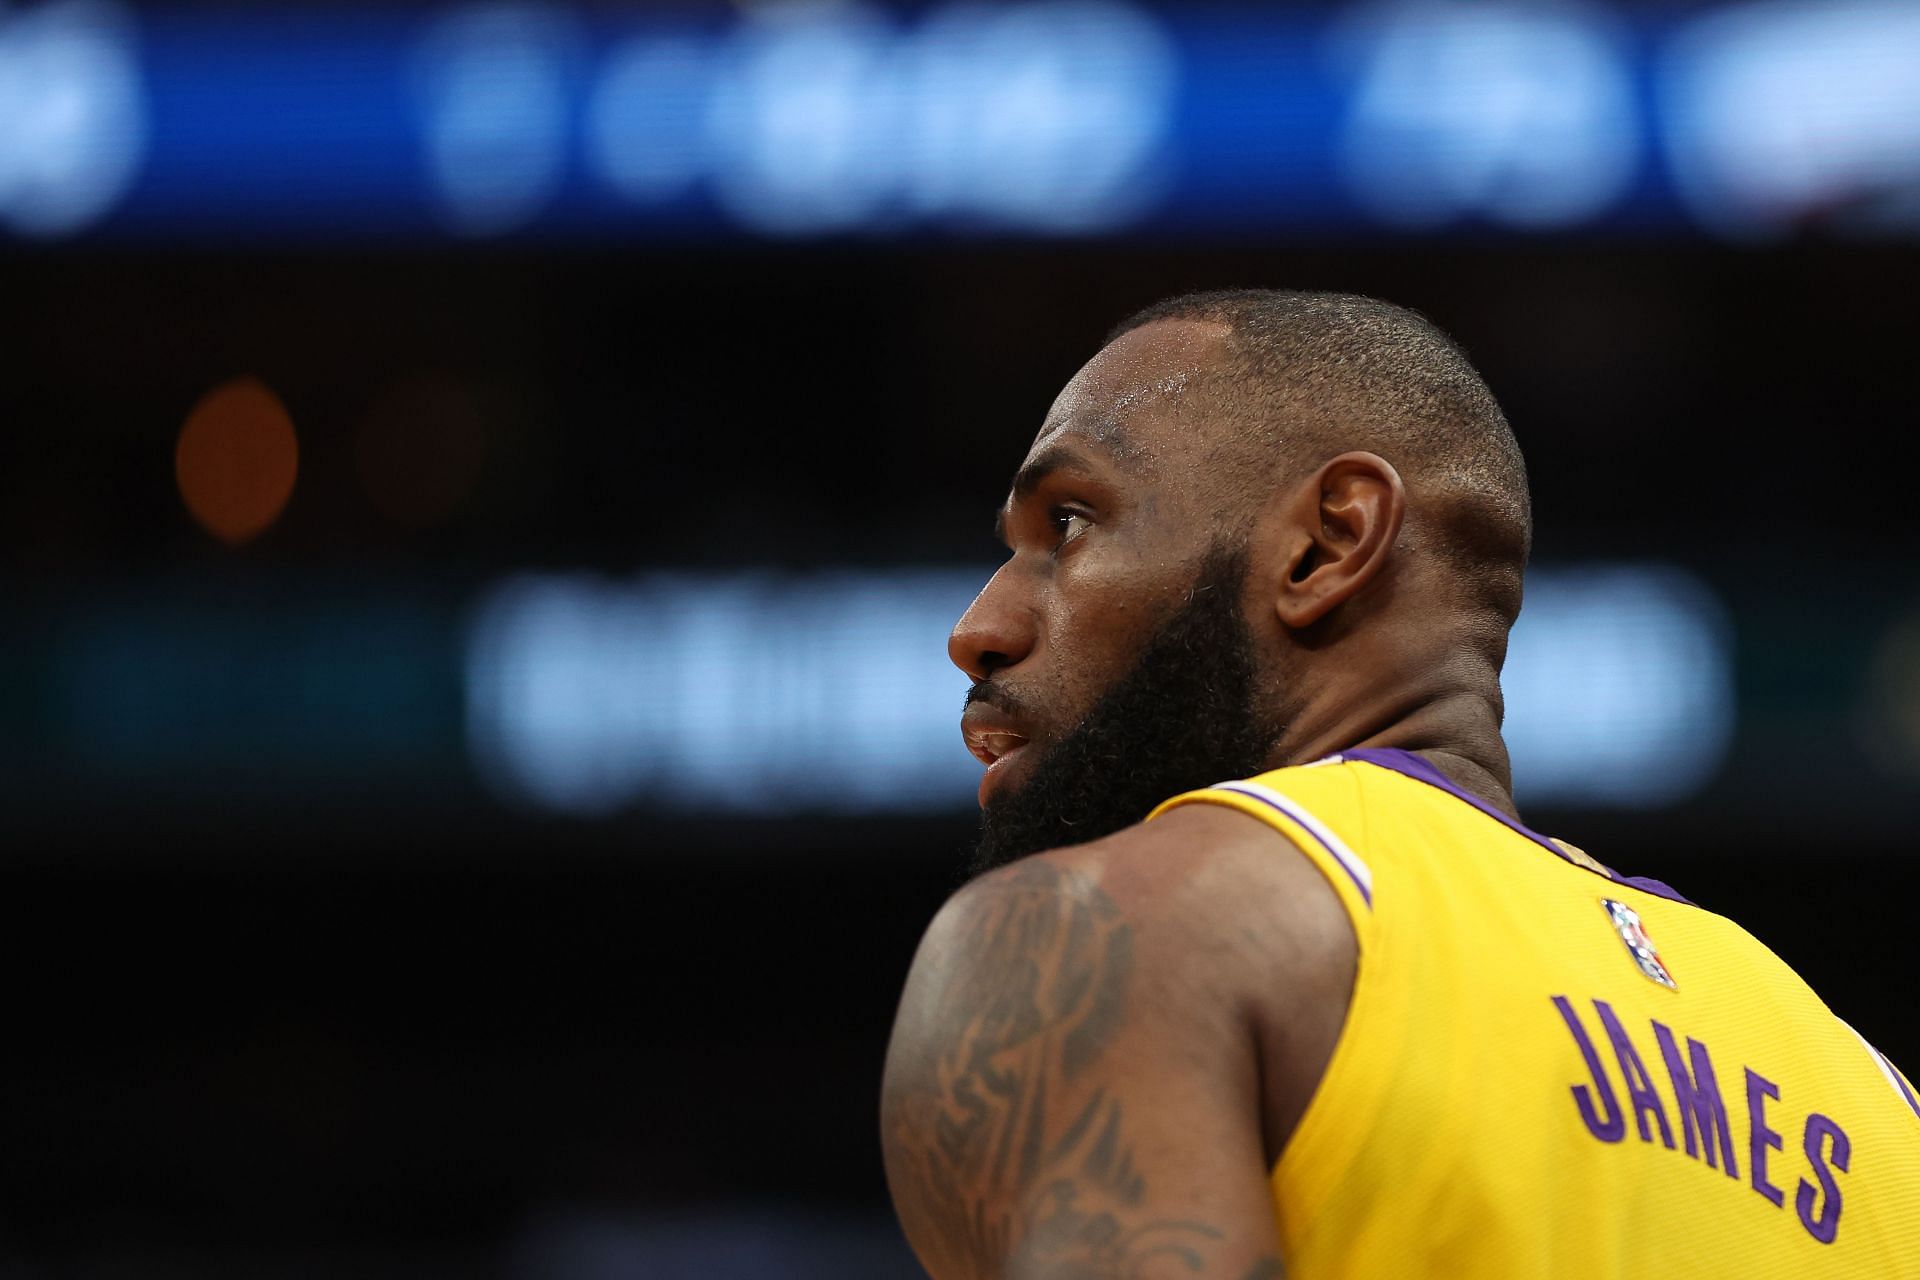 LeBron James of the Los Angeles Lakers during their game against the Washington Wizards on March 19 in Washington, DC